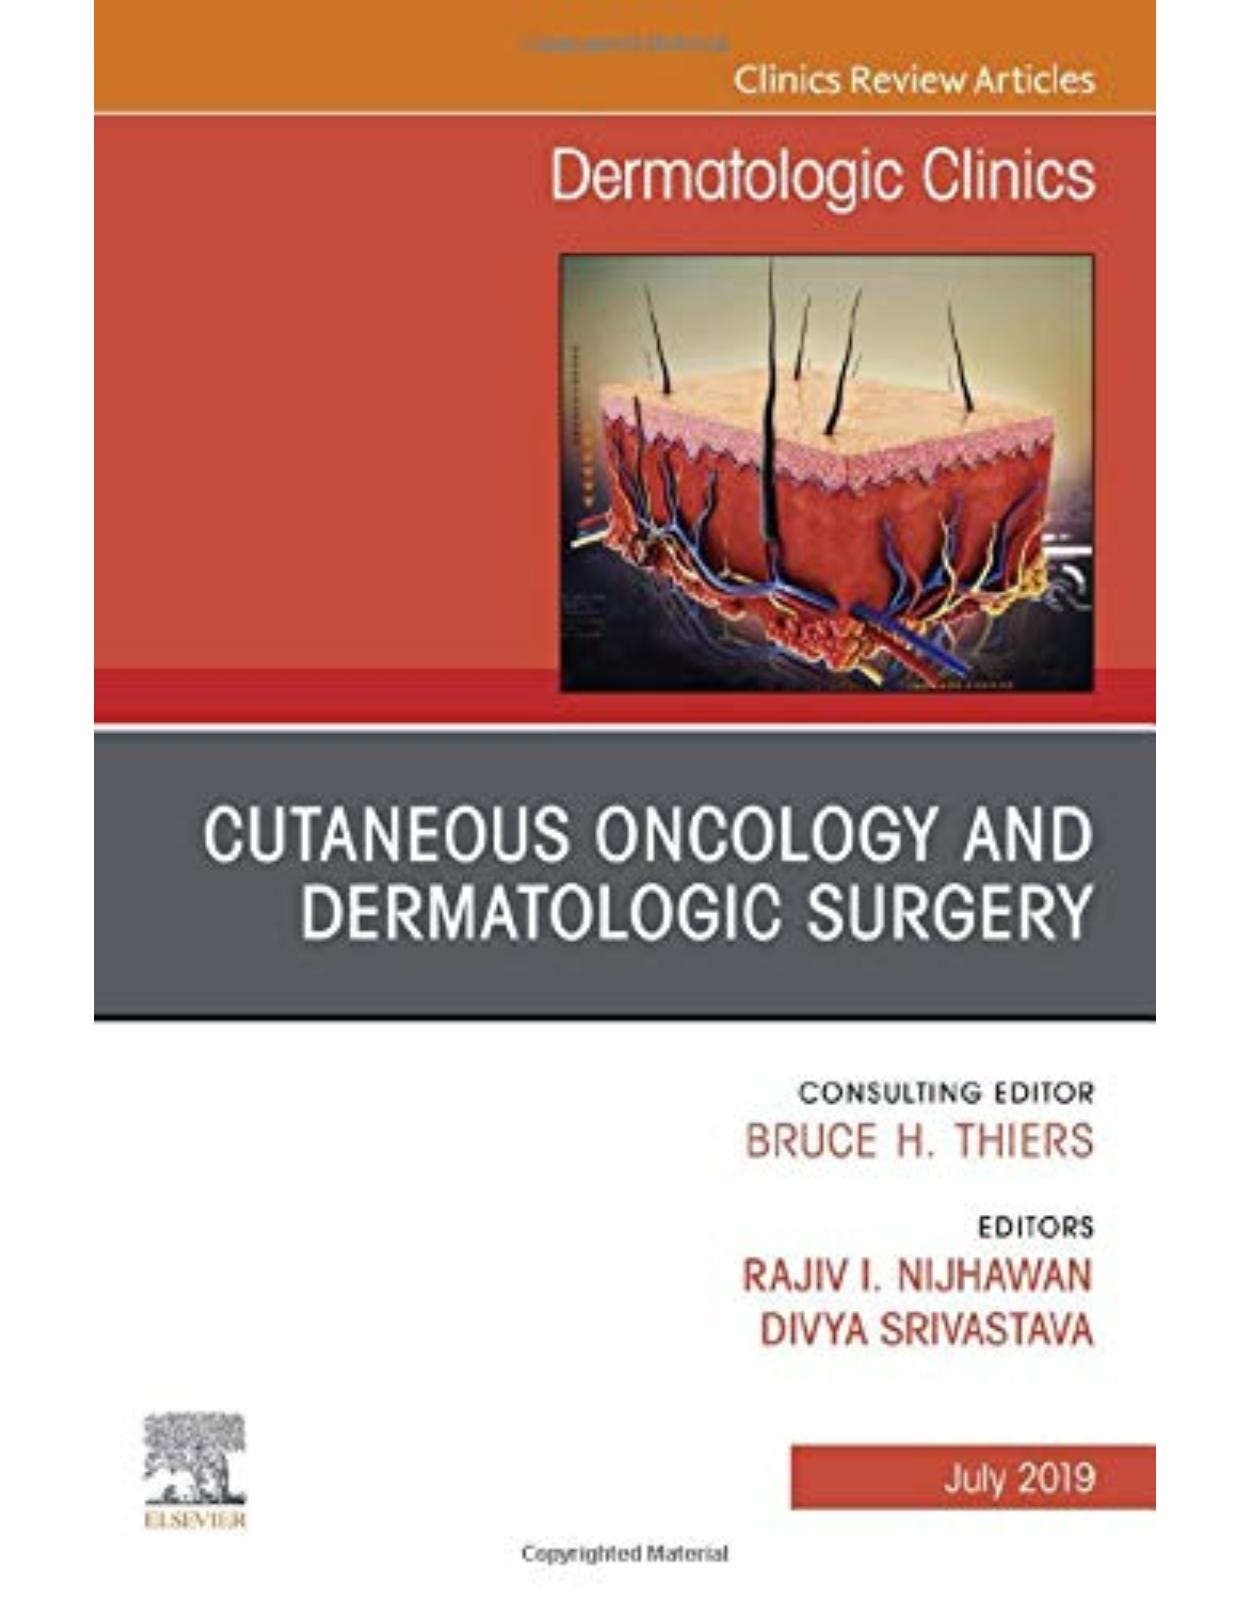 Cutaneous Oncology and Dermatologic Surgery, An Issue of Dermatologic Clinics, Volume 37-3